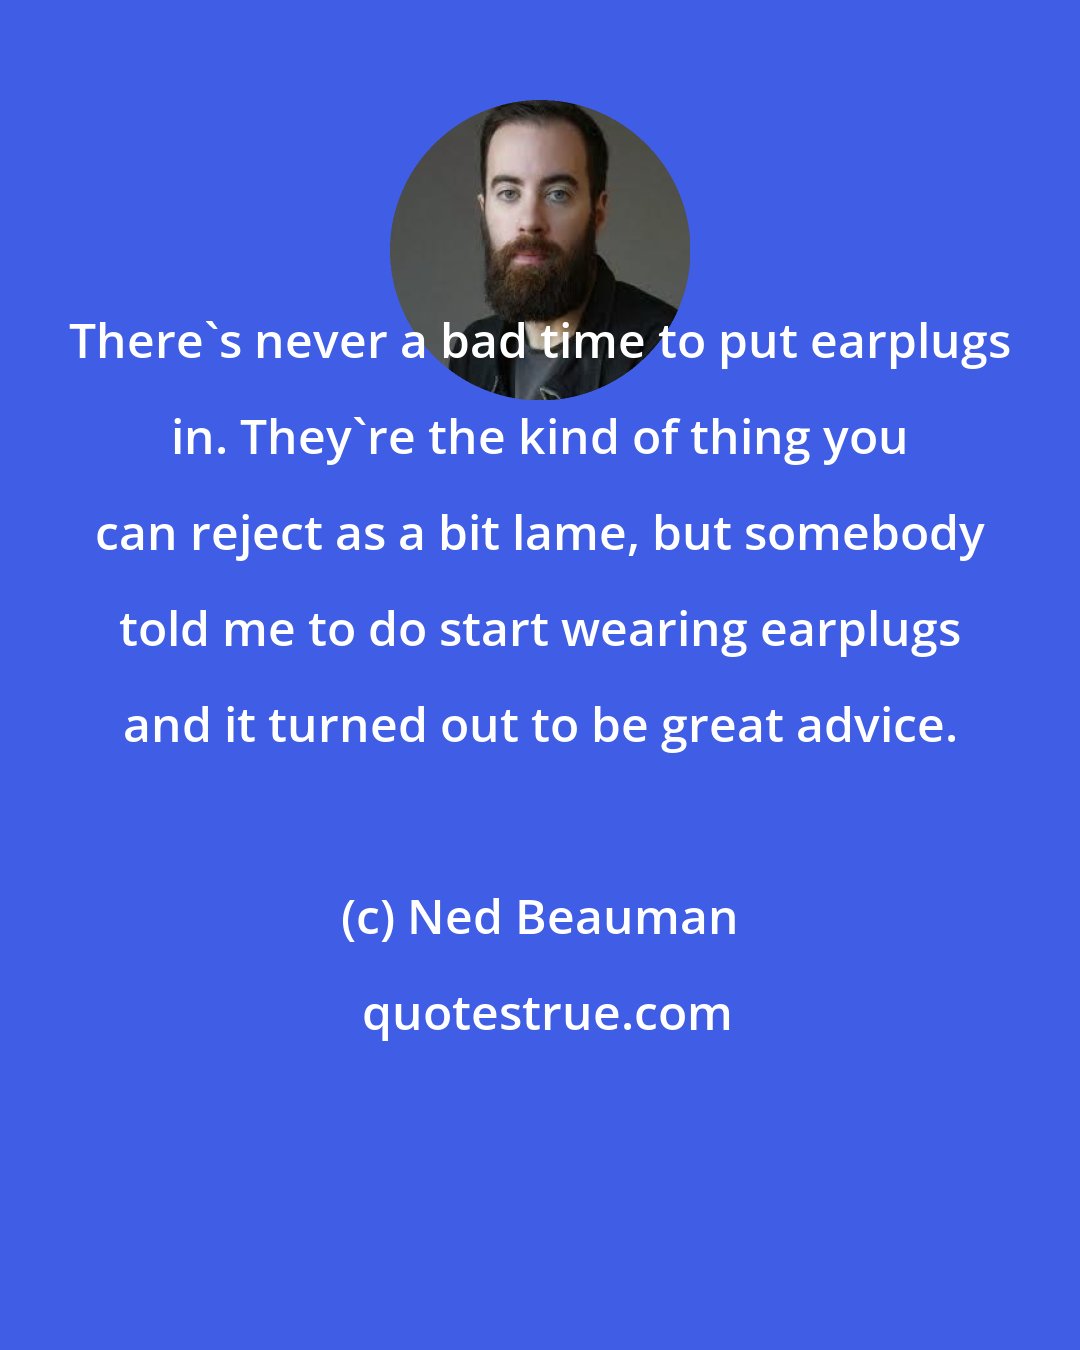 Ned Beauman: There's never a bad time to put earplugs in. They're the kind of thing you can reject as a bit lame, but somebody told me to do start wearing earplugs and it turned out to be great advice.